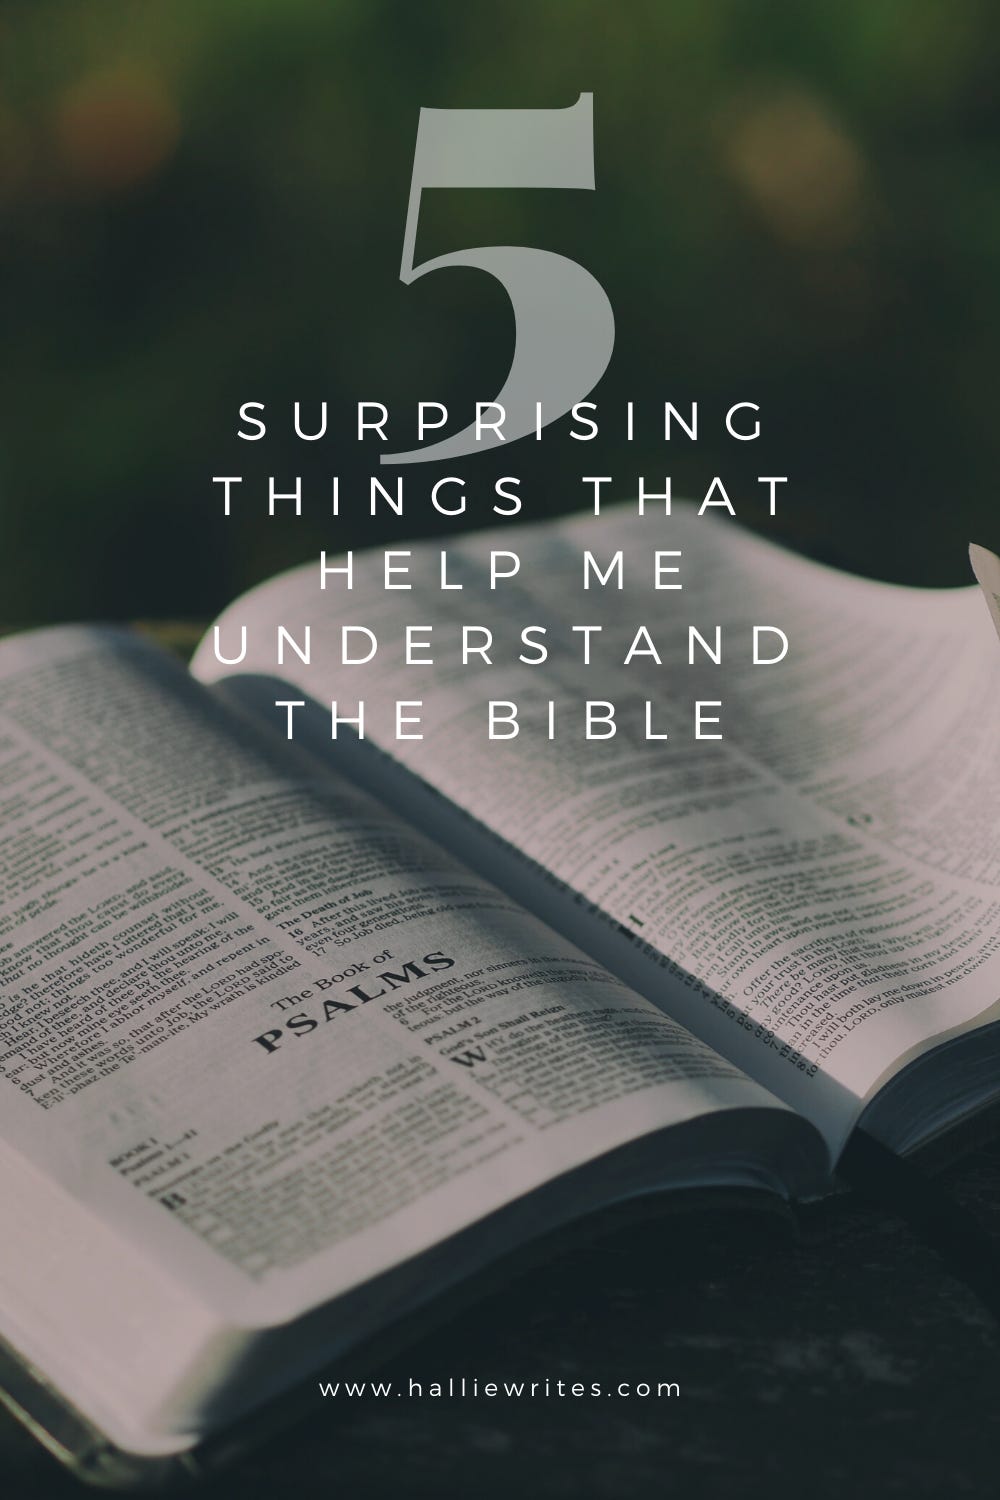 Five surprising things that help me understand and study the Bible